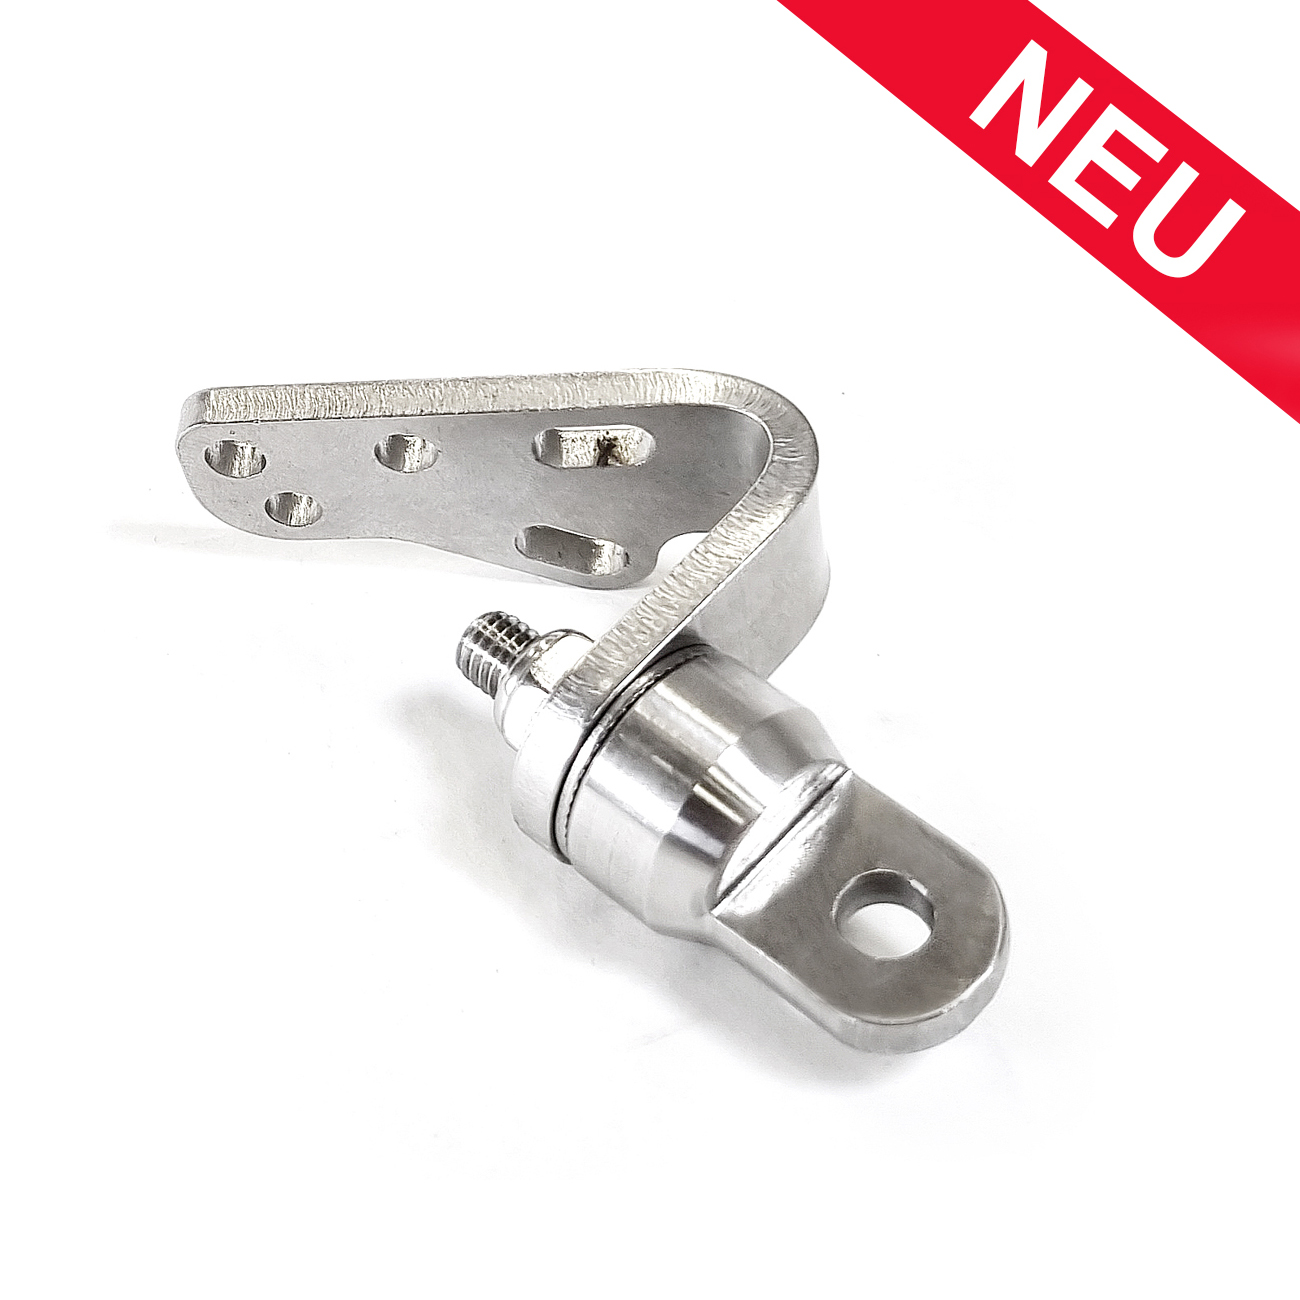 Hinterher hitch No. 10 - Universal including joint and adapter